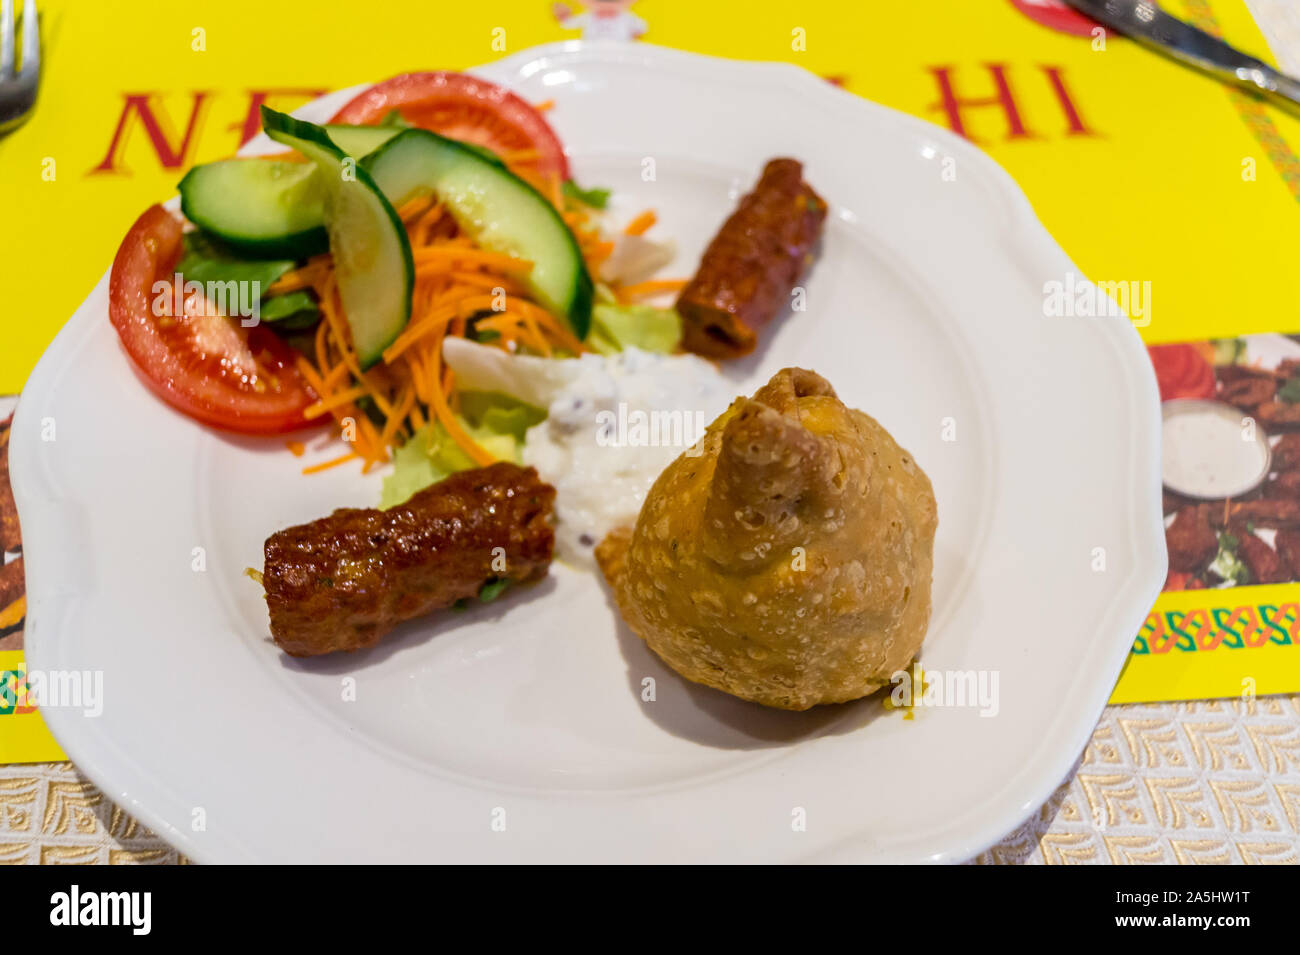 Sheek kebab, and vegetable samosa, New Delhi indian restaurant, Luxembourg city, Grand Duchy of Luxembourg Stock Photo